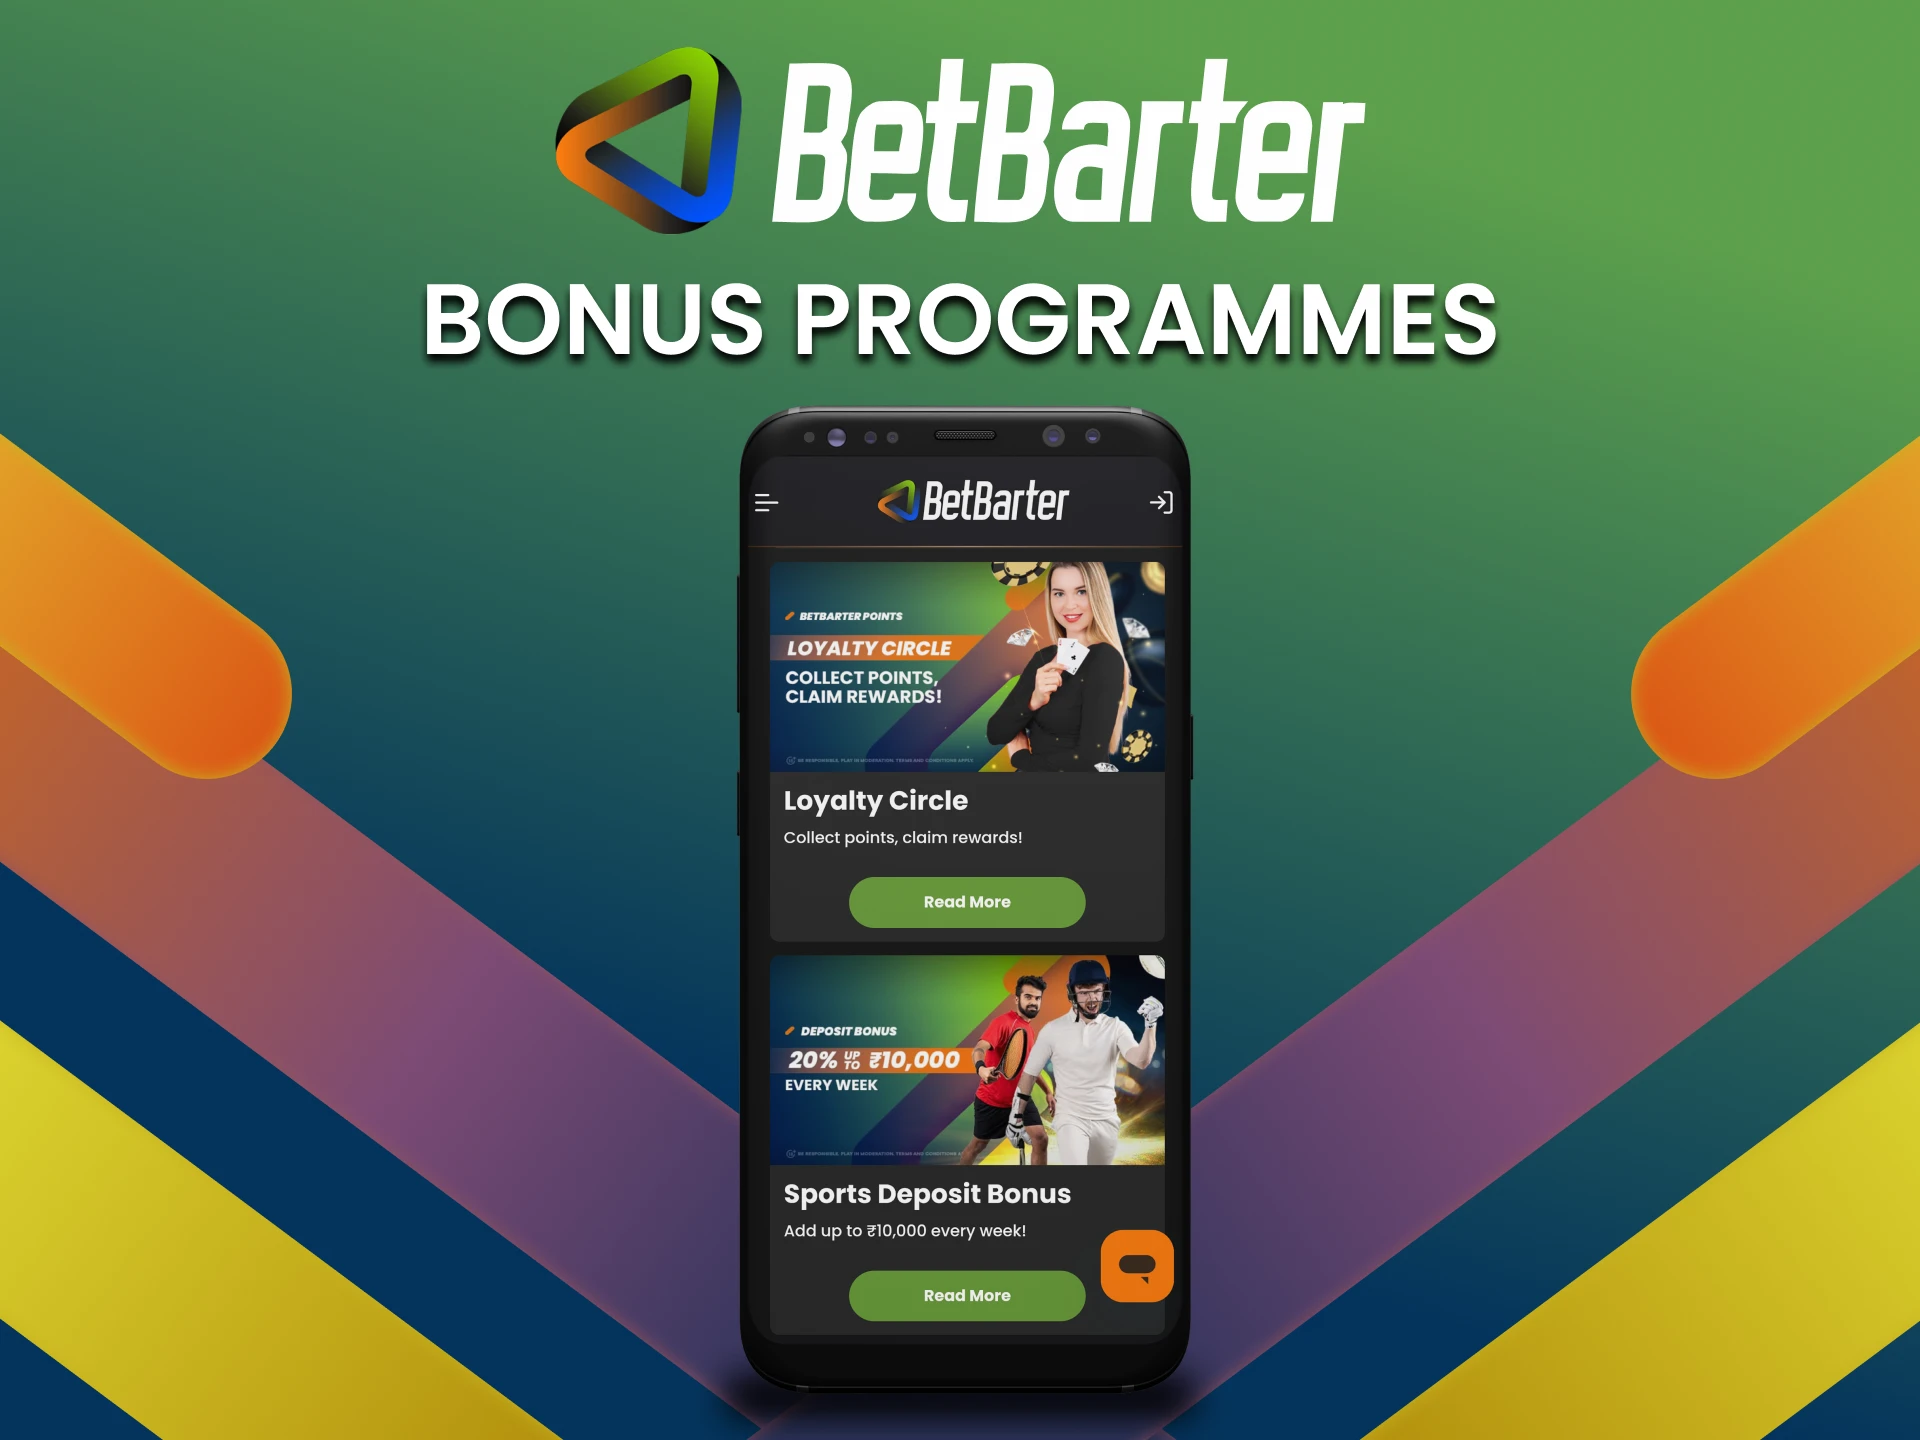 Receive special offers from BetBarter app, which will give you a new and pleasant interaction experience.